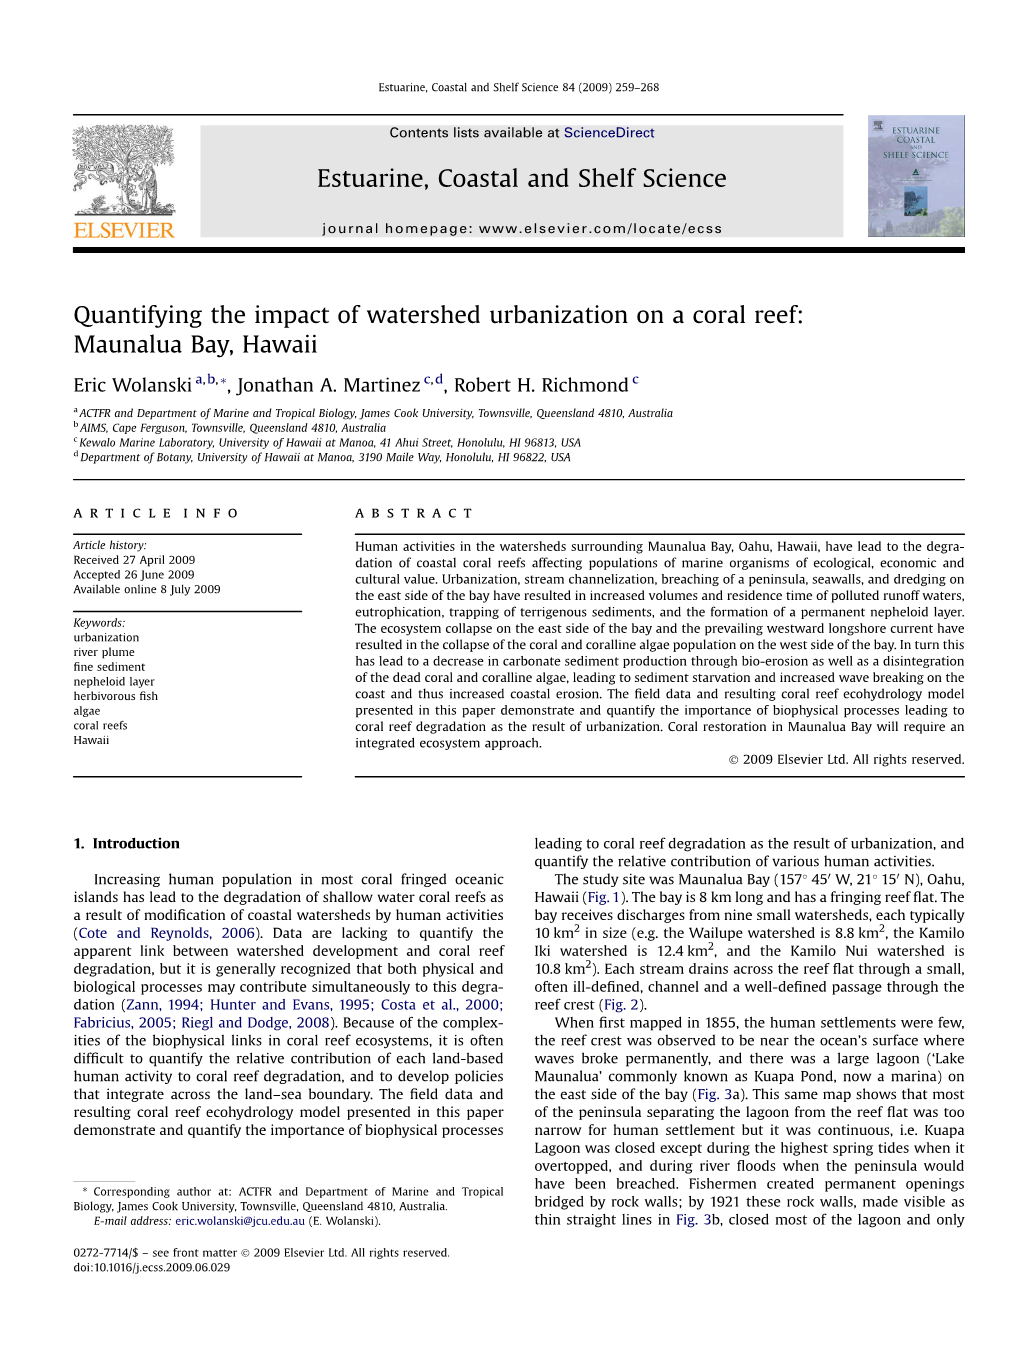 Quantifying the Impact of Watershed Urbanization on a Coral Reef: Maunalua Bay, Hawaii